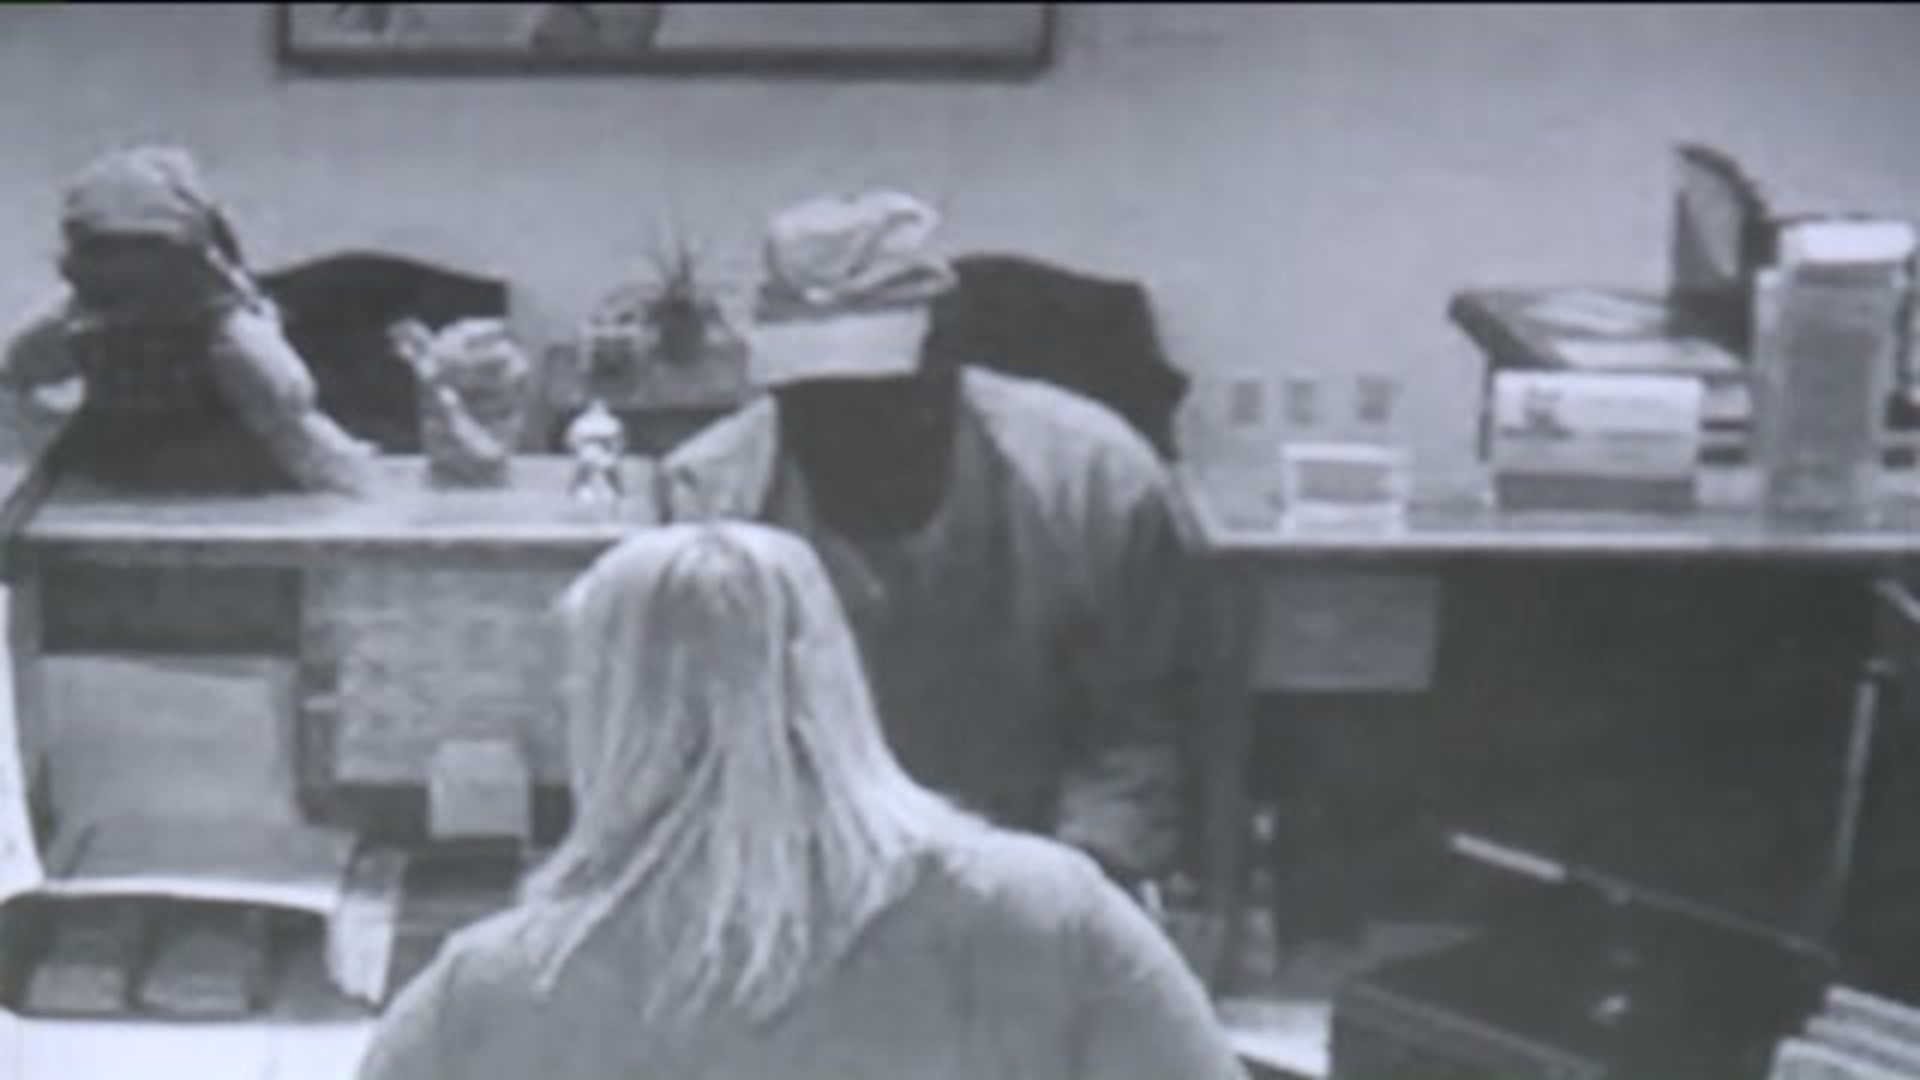 Bank Robbery in Lackawanna County, Security Photos Released